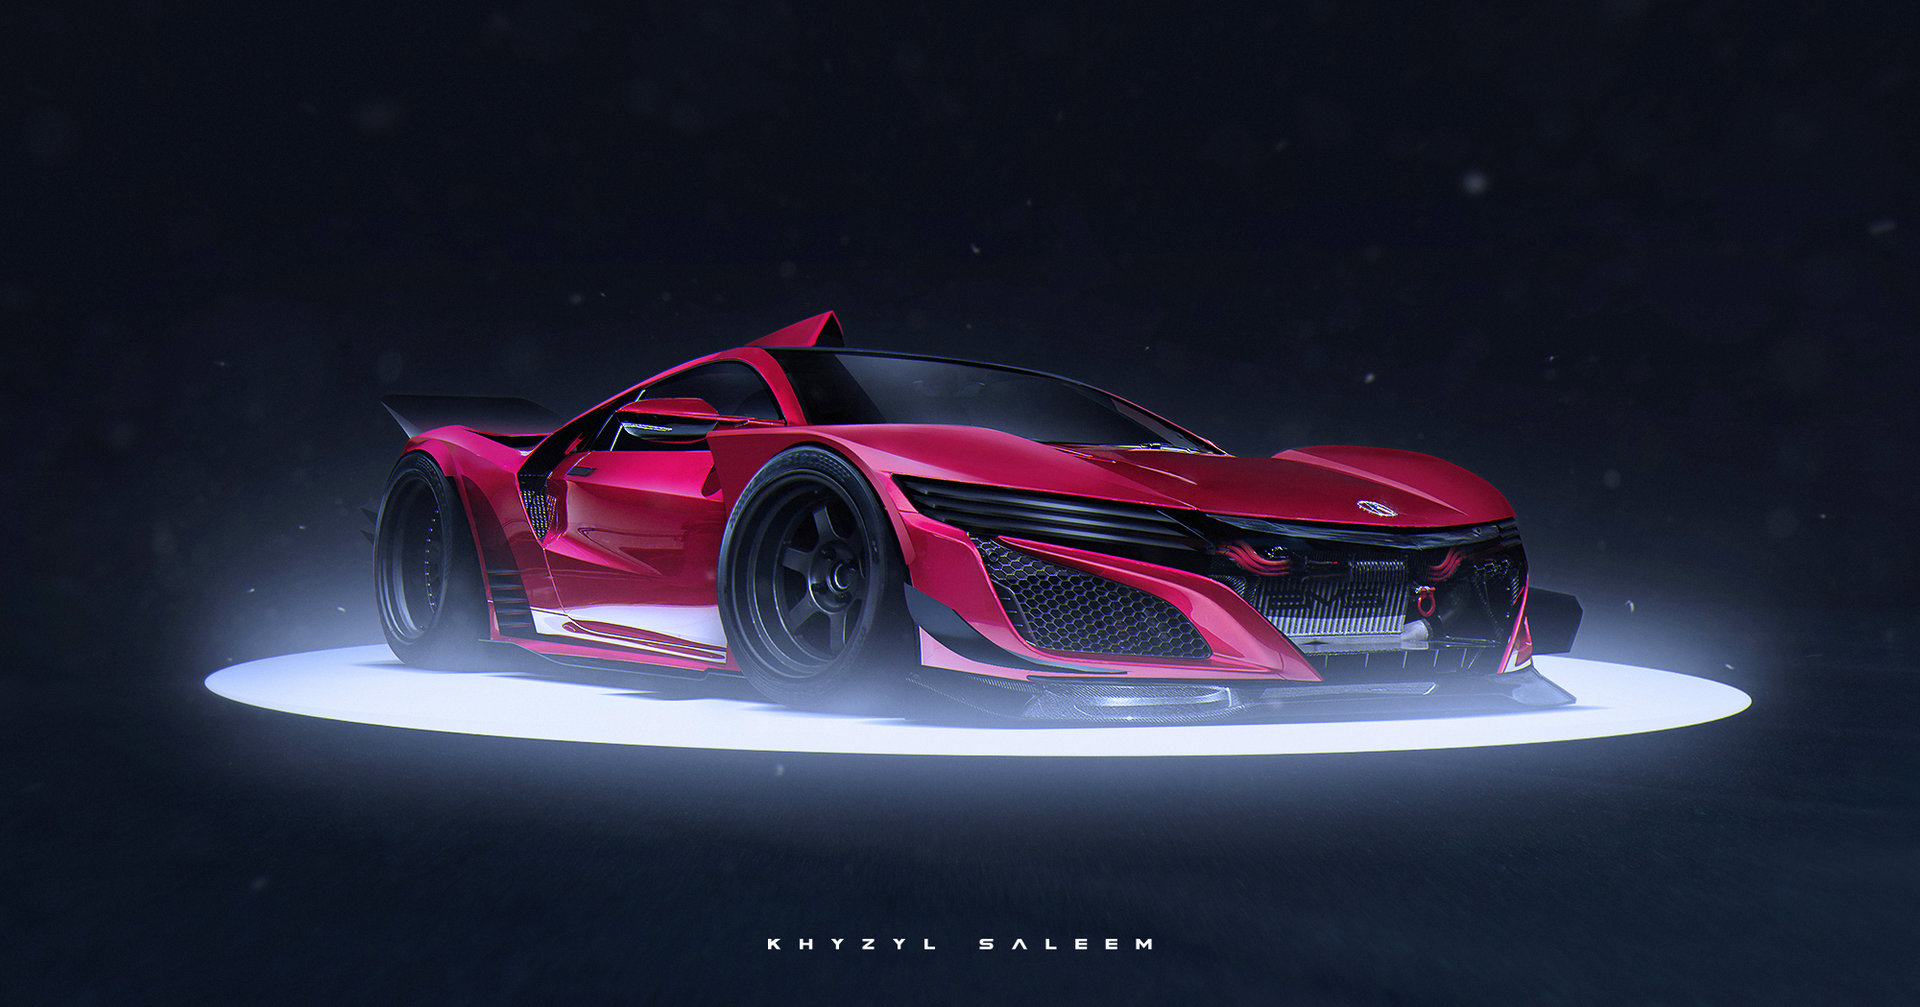 Free Download 2016 Acura Nsx High Definition Wallpapers Attachment 9076 Grivucom 1920x1007 For Your Desktop Mobile Tablet Explore 45 Nsx Wallpaper High Resolution Acura Logo Wallpaper Honda Nsx Wallpaper Acura Nsx Wallpaper Hd